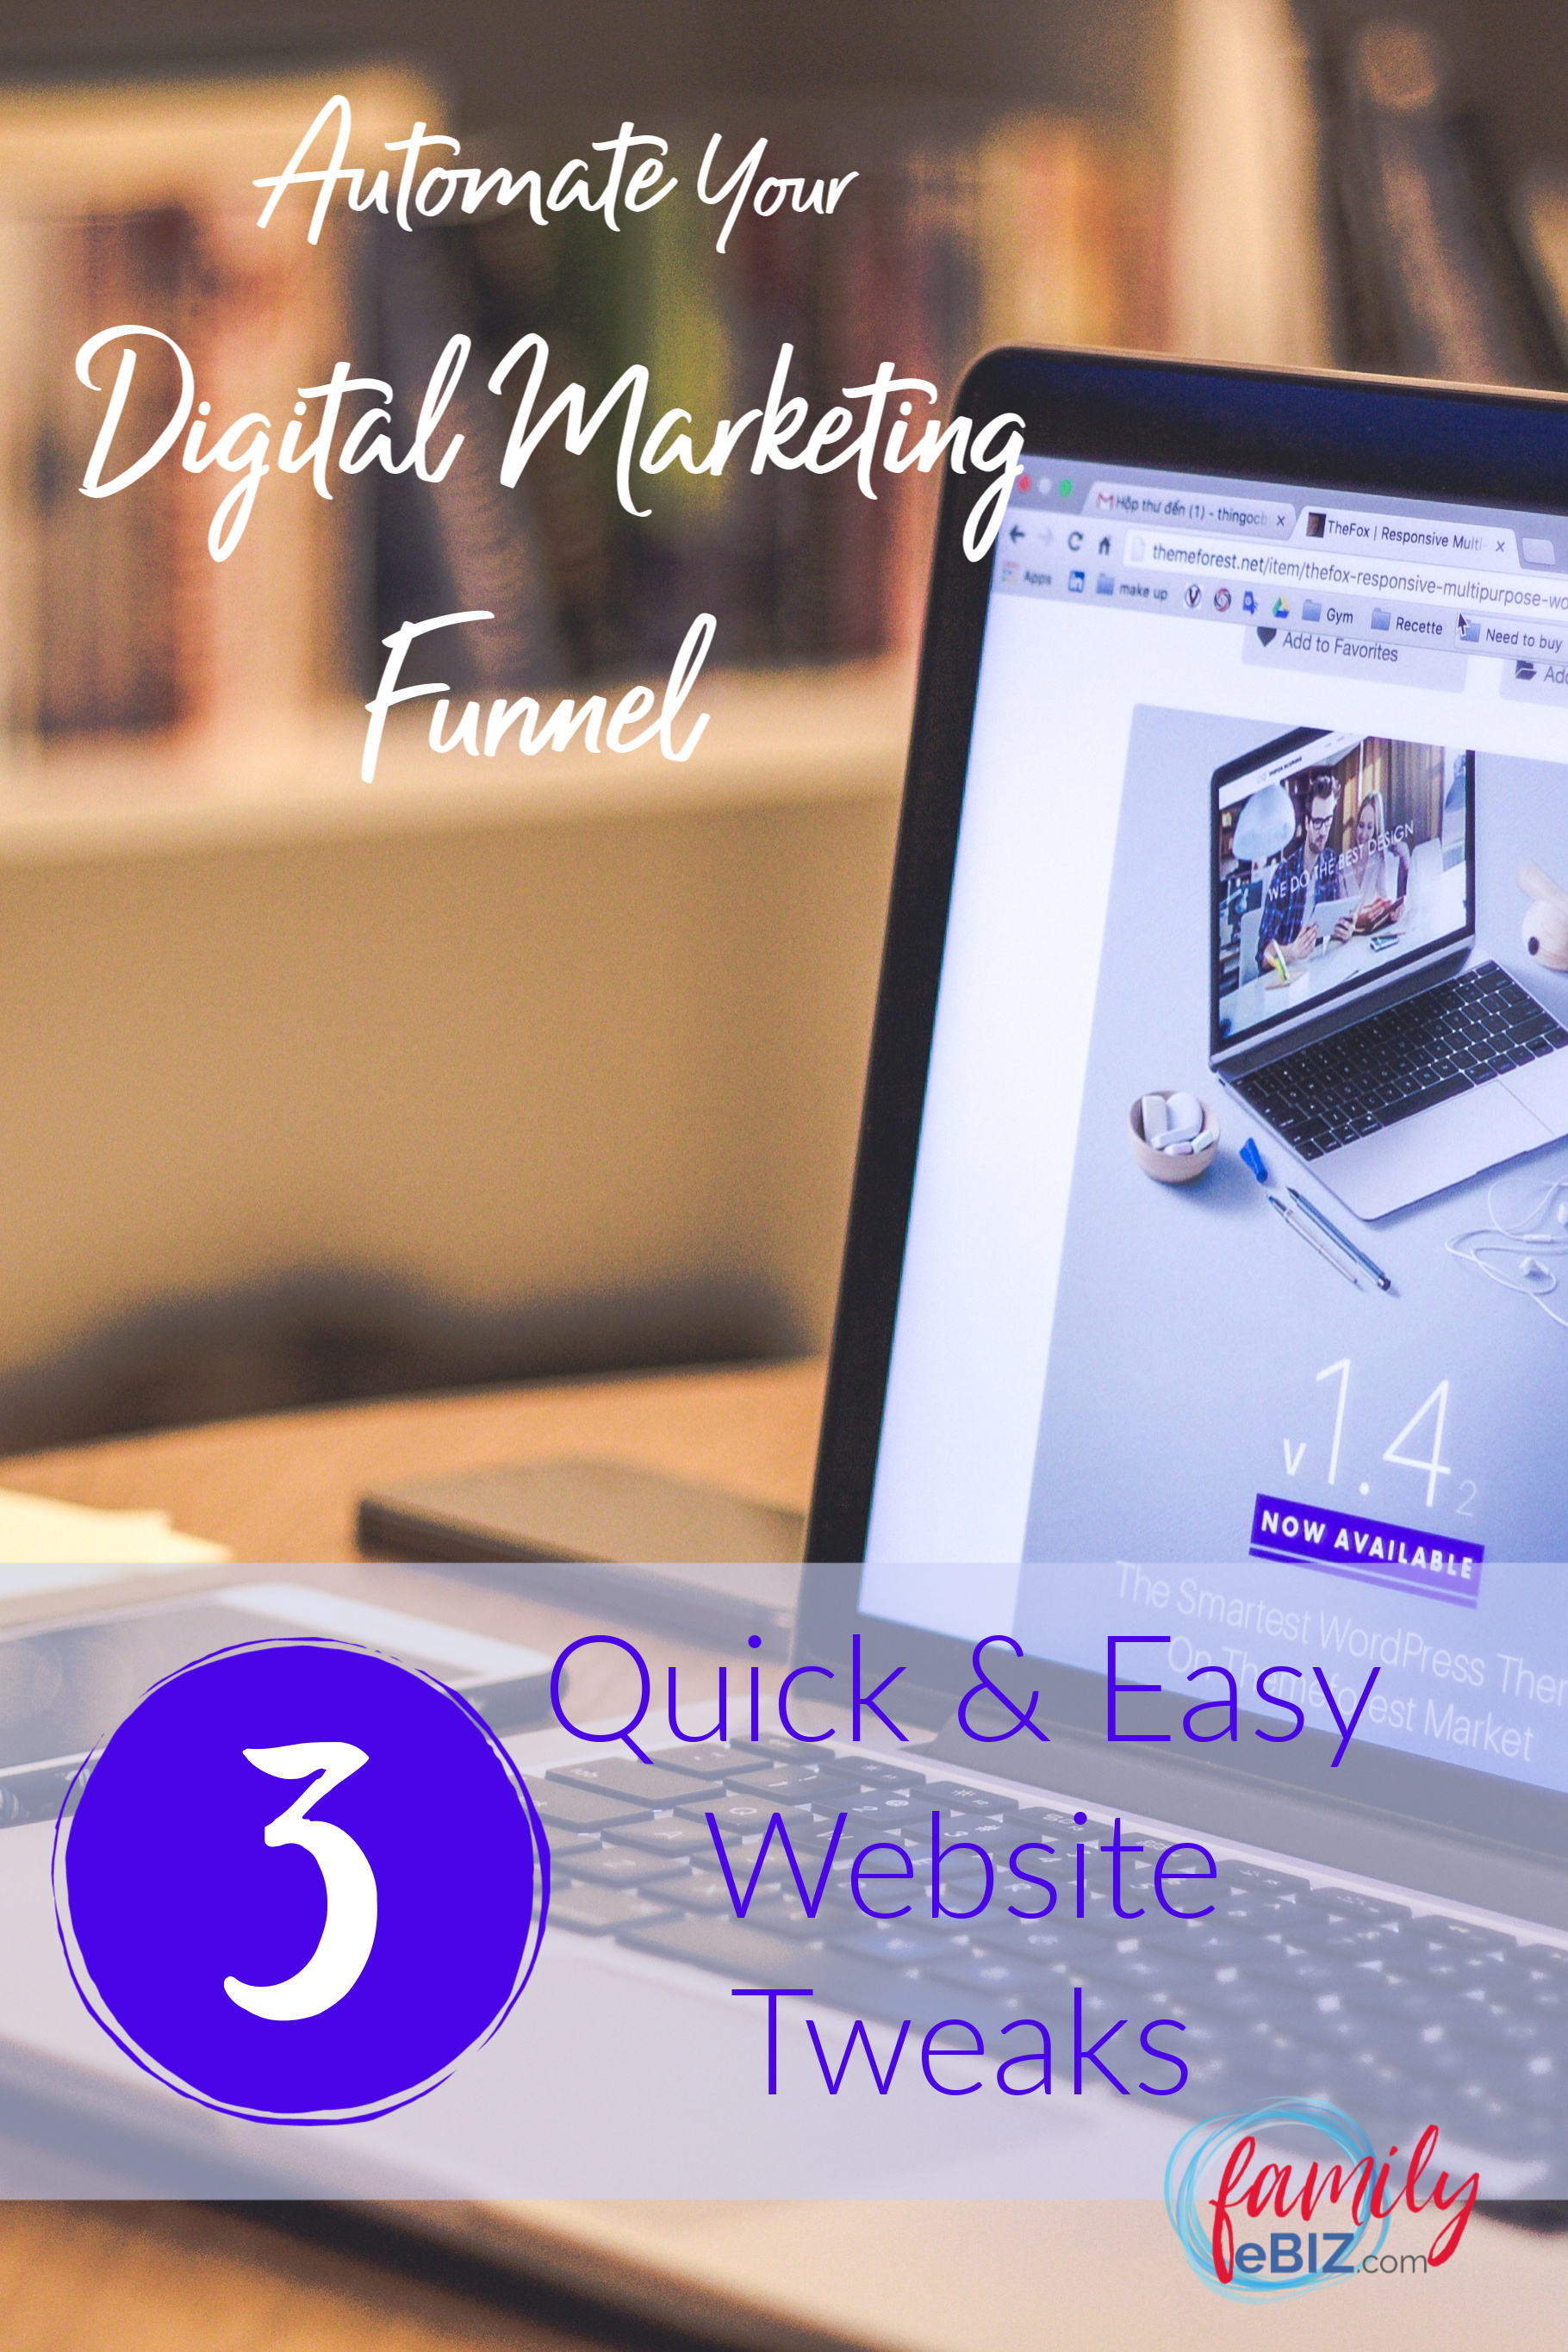 Automate your digital marketing funnel with 3 quick & easy website tweaks